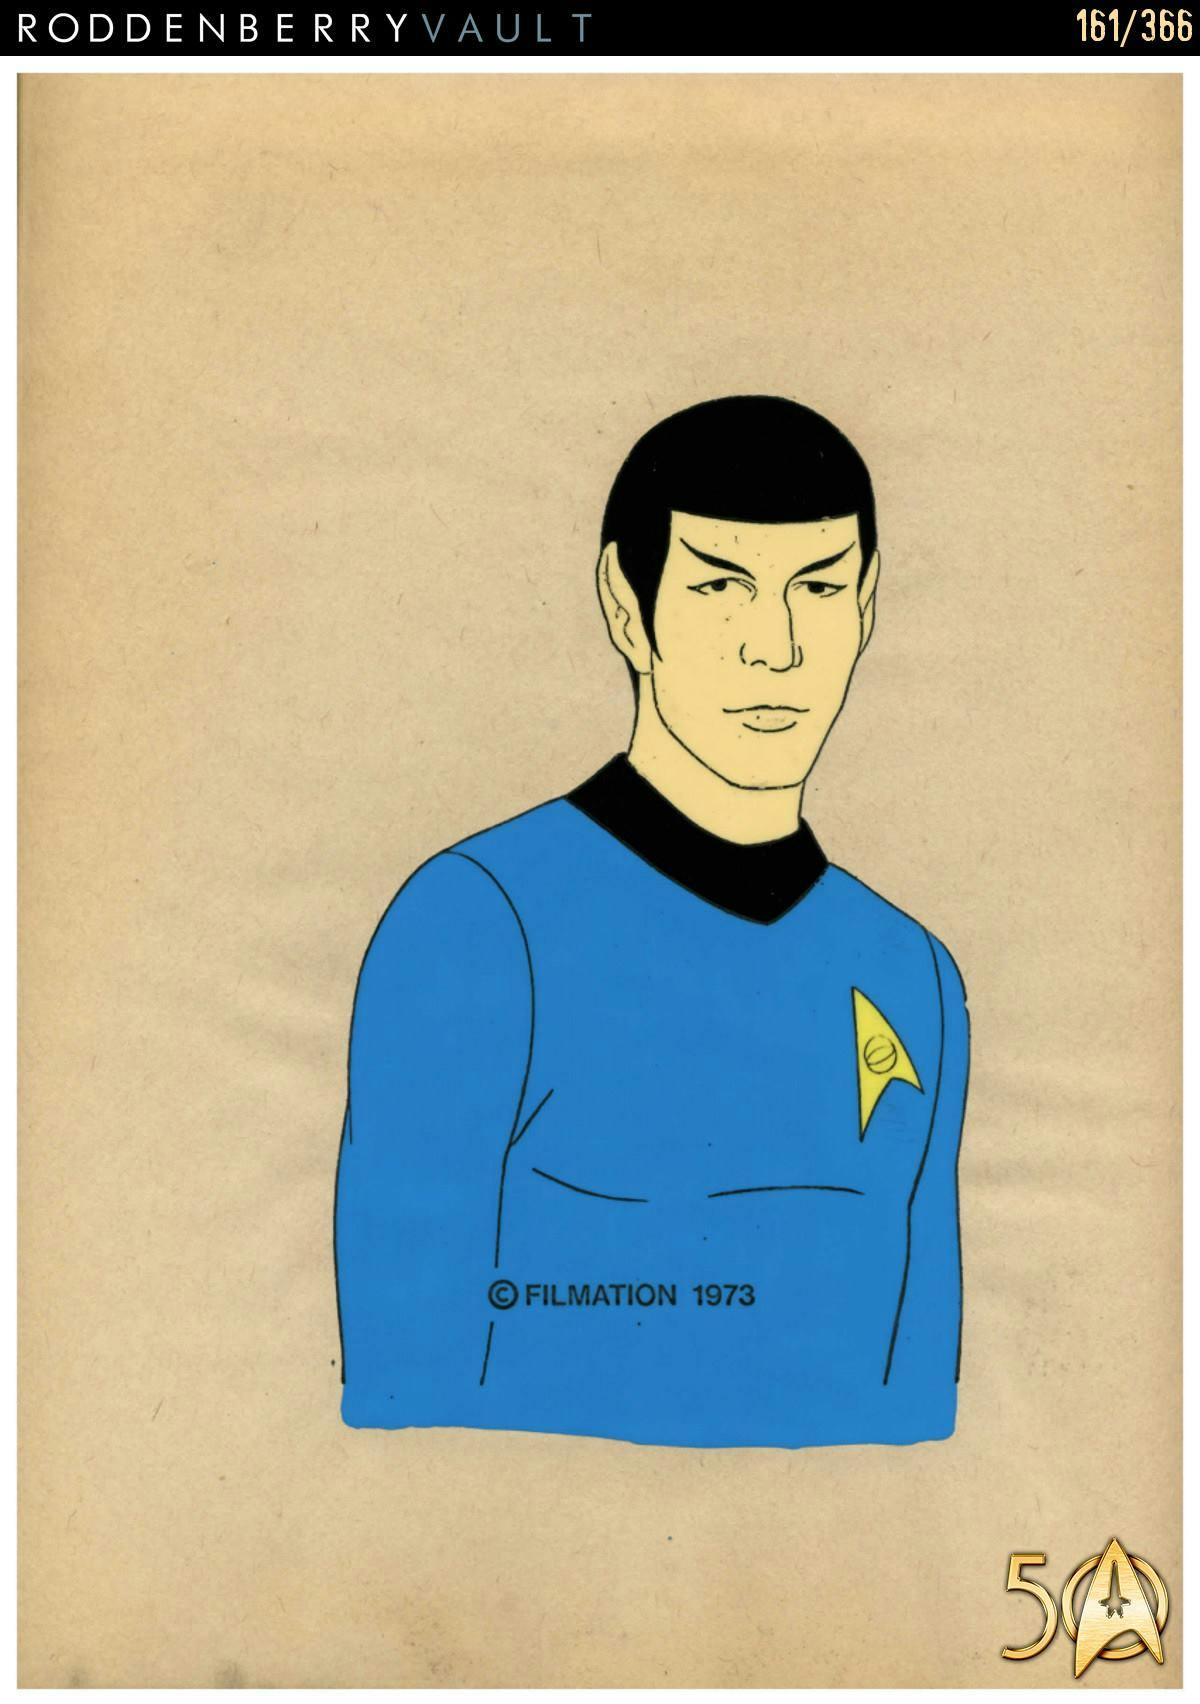 From the Roddenberry 366 Vault - The Animated Series - Filmation promotional art of Spock